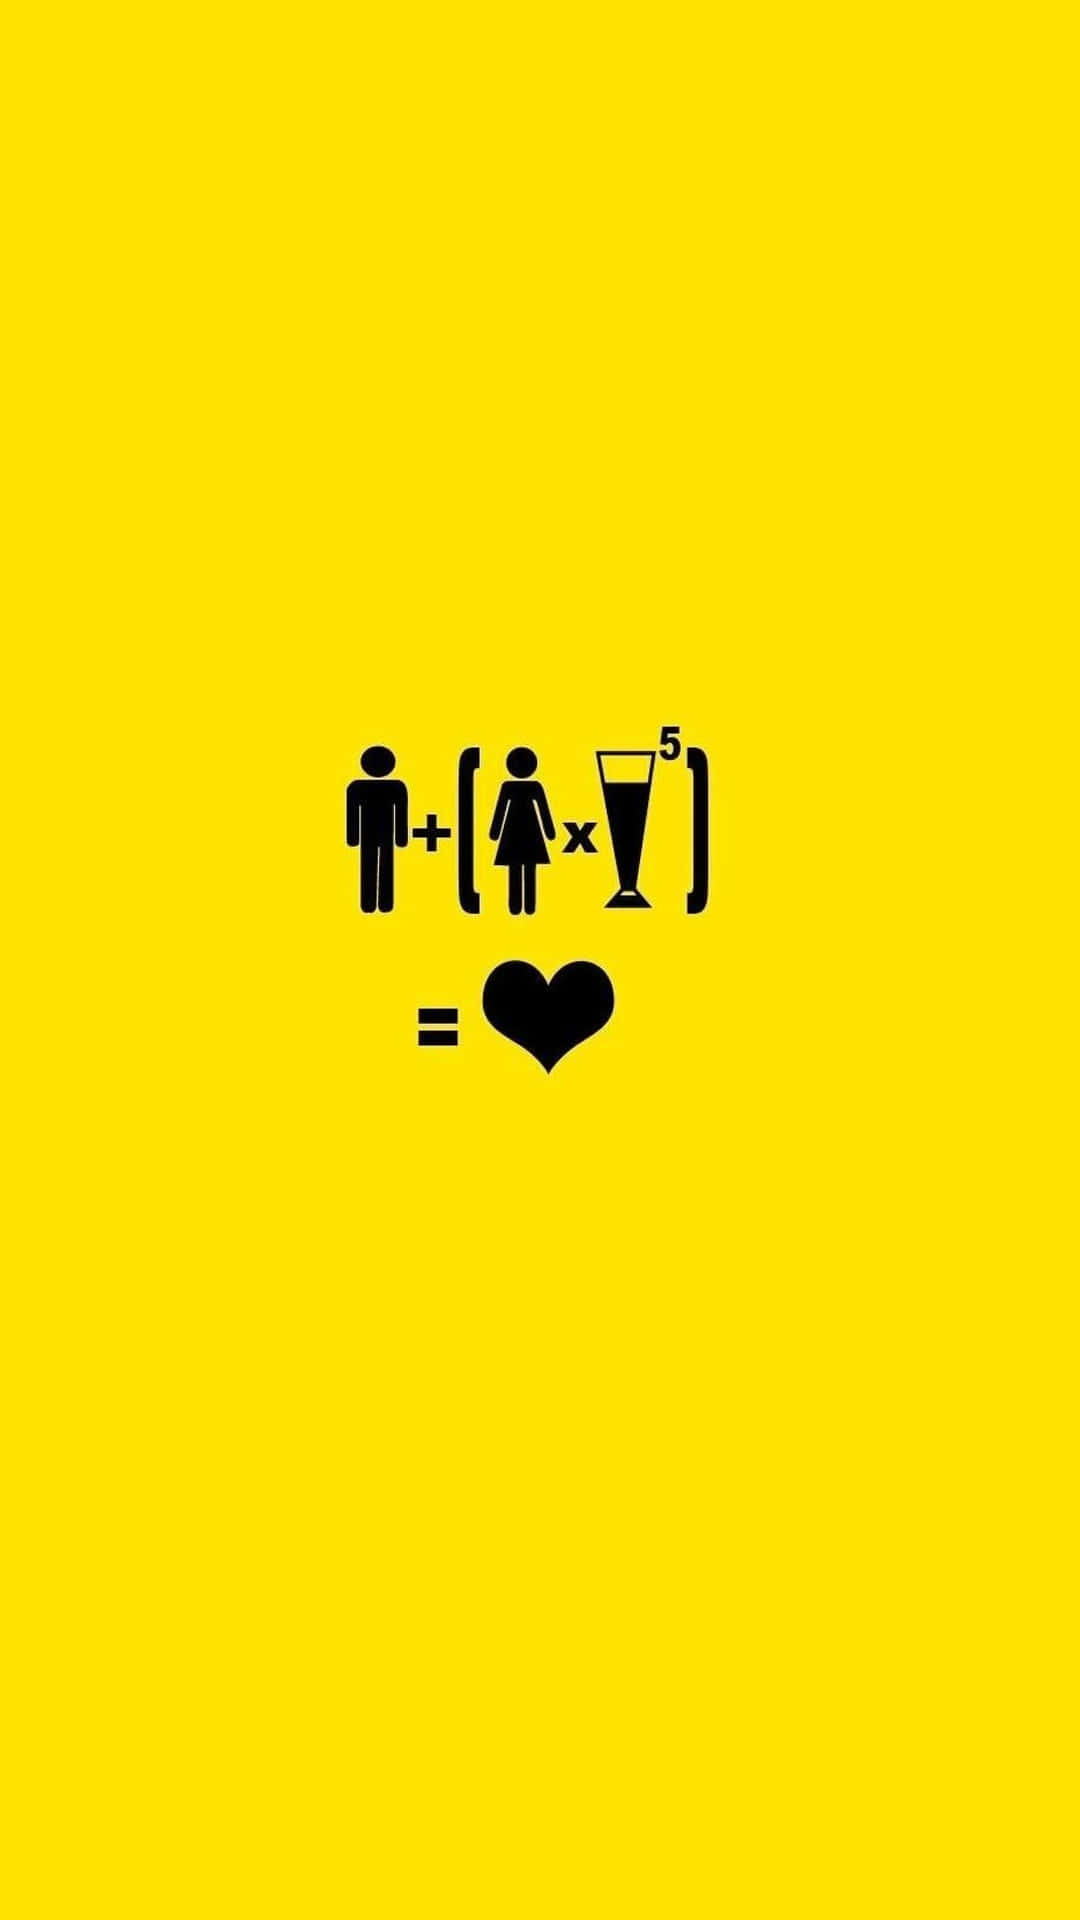 A Yellow Background With A Black And White Symbol Of A Man And Woman Wallpaper